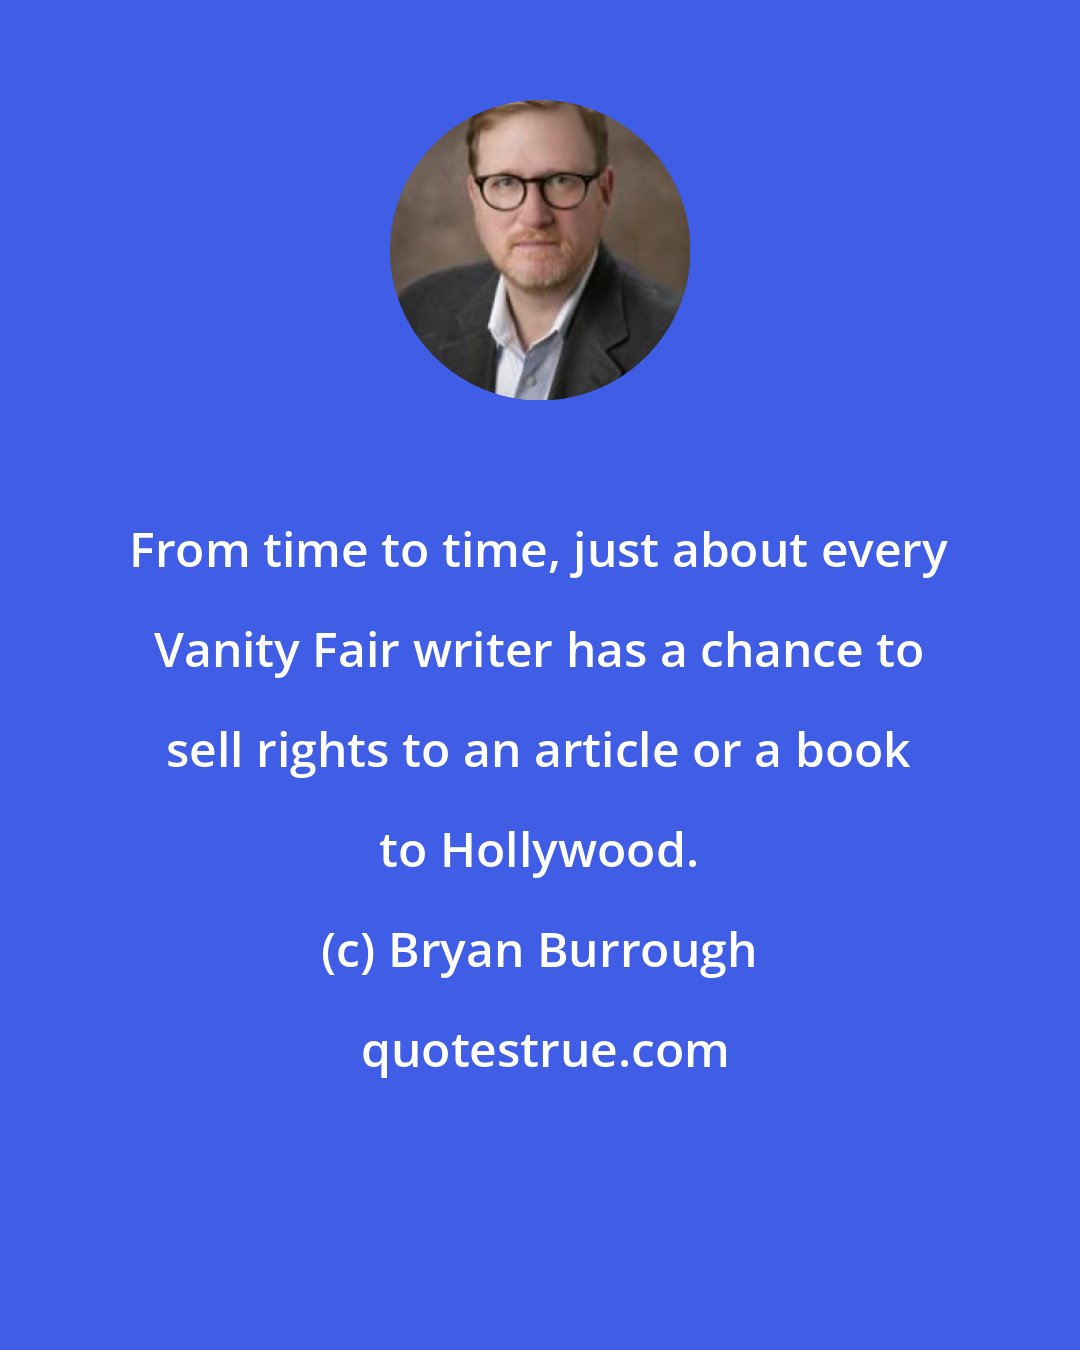 Bryan Burrough: From time to time, just about every Vanity Fair writer has a chance to sell rights to an article or a book to Hollywood.